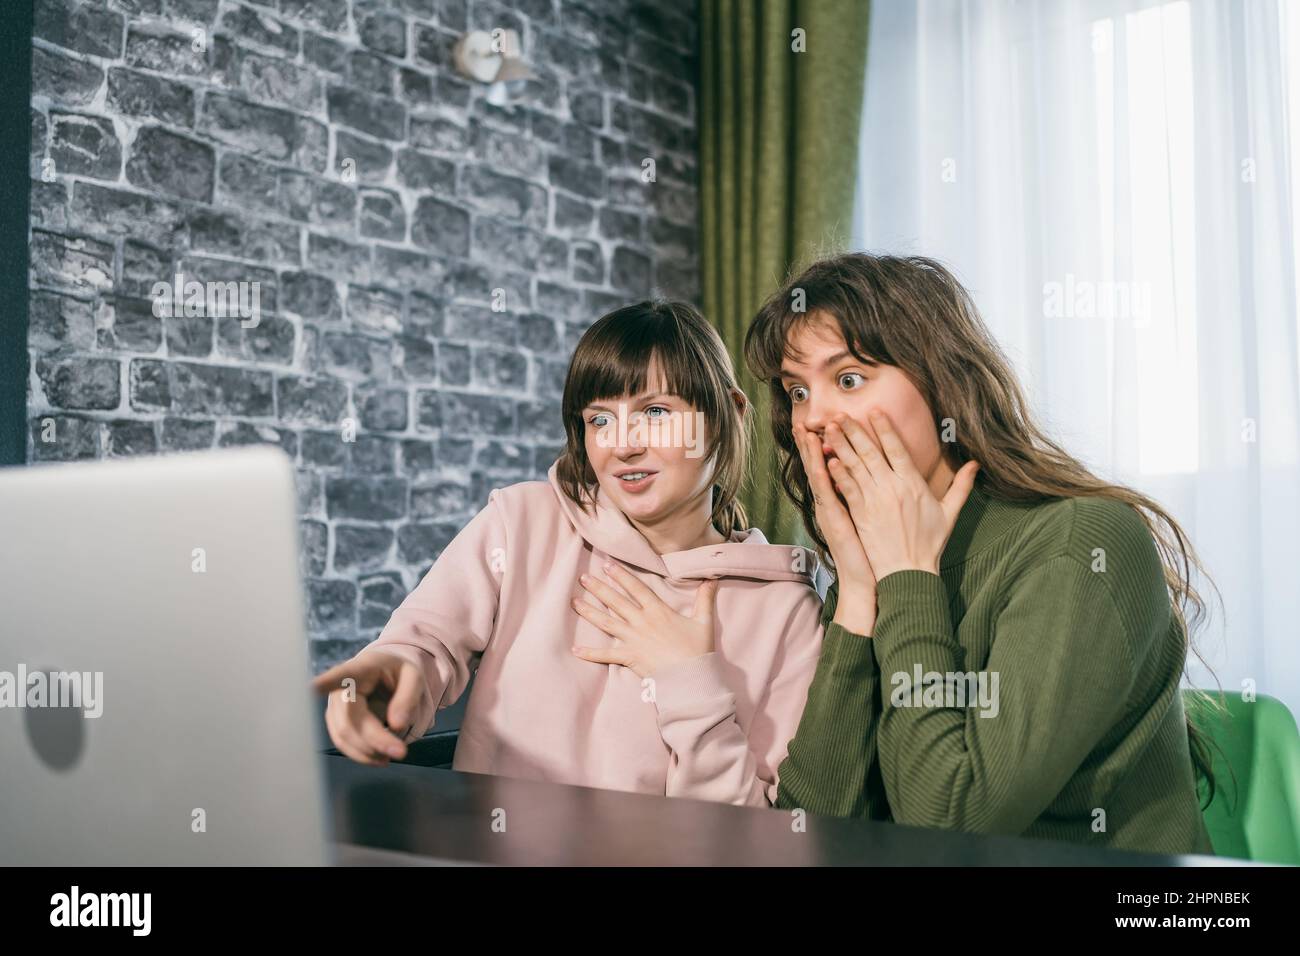 Two young women receive good news by internet or winning lottery looking at laptop. Happy surprised girl gets positive emotion. Stock Photo